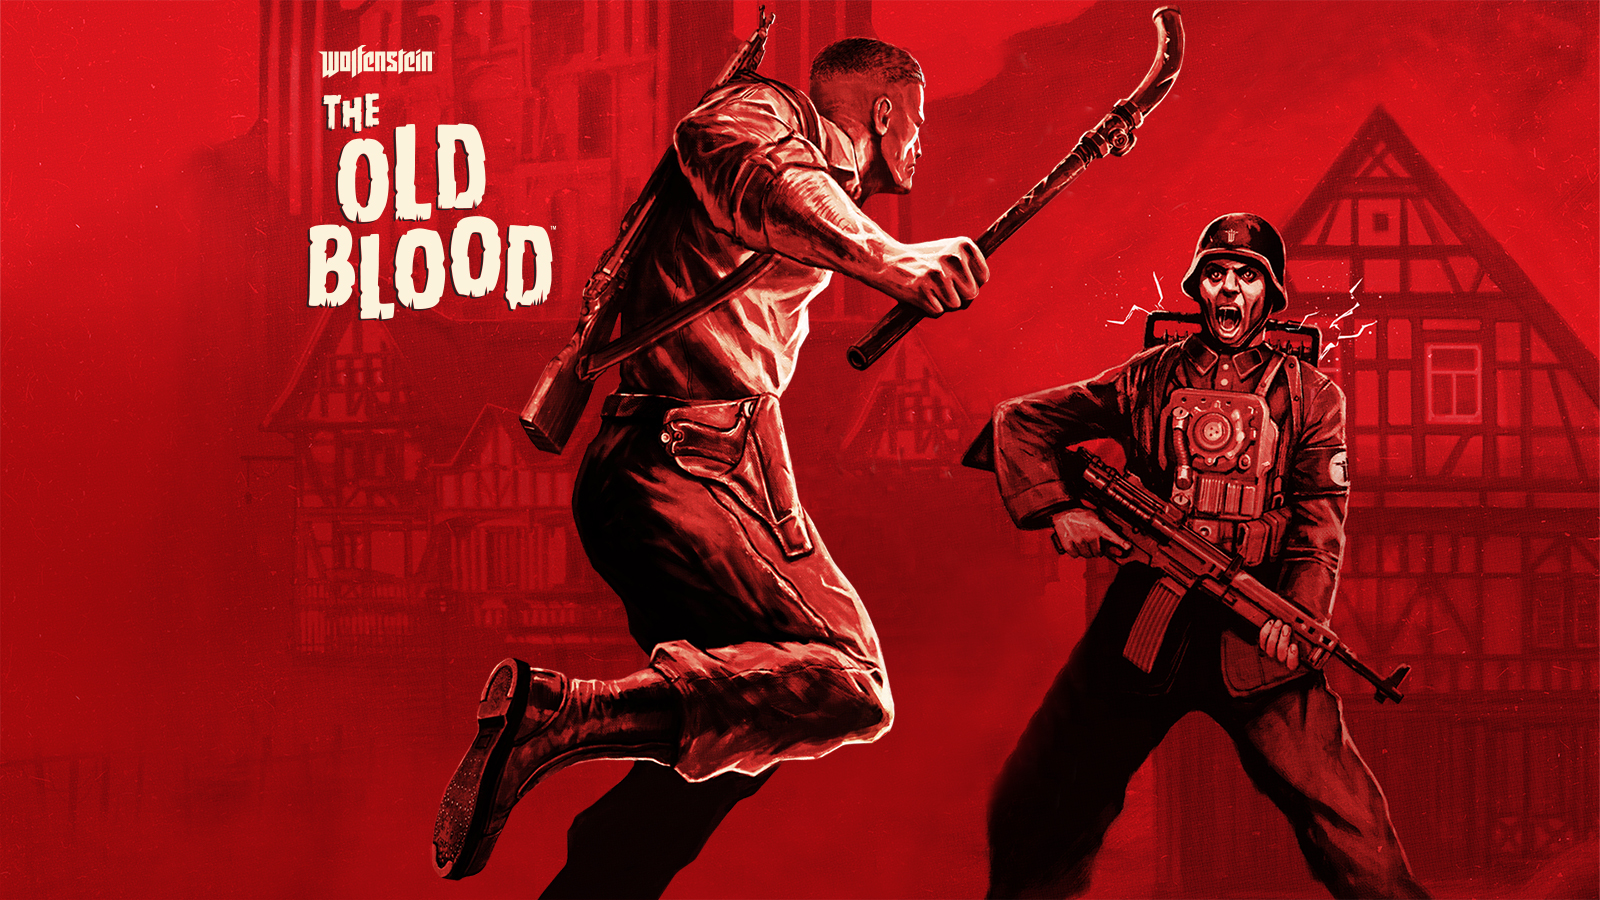 wolfenstein-the-old-blood-listing-thumb-01-us-06apr15.png